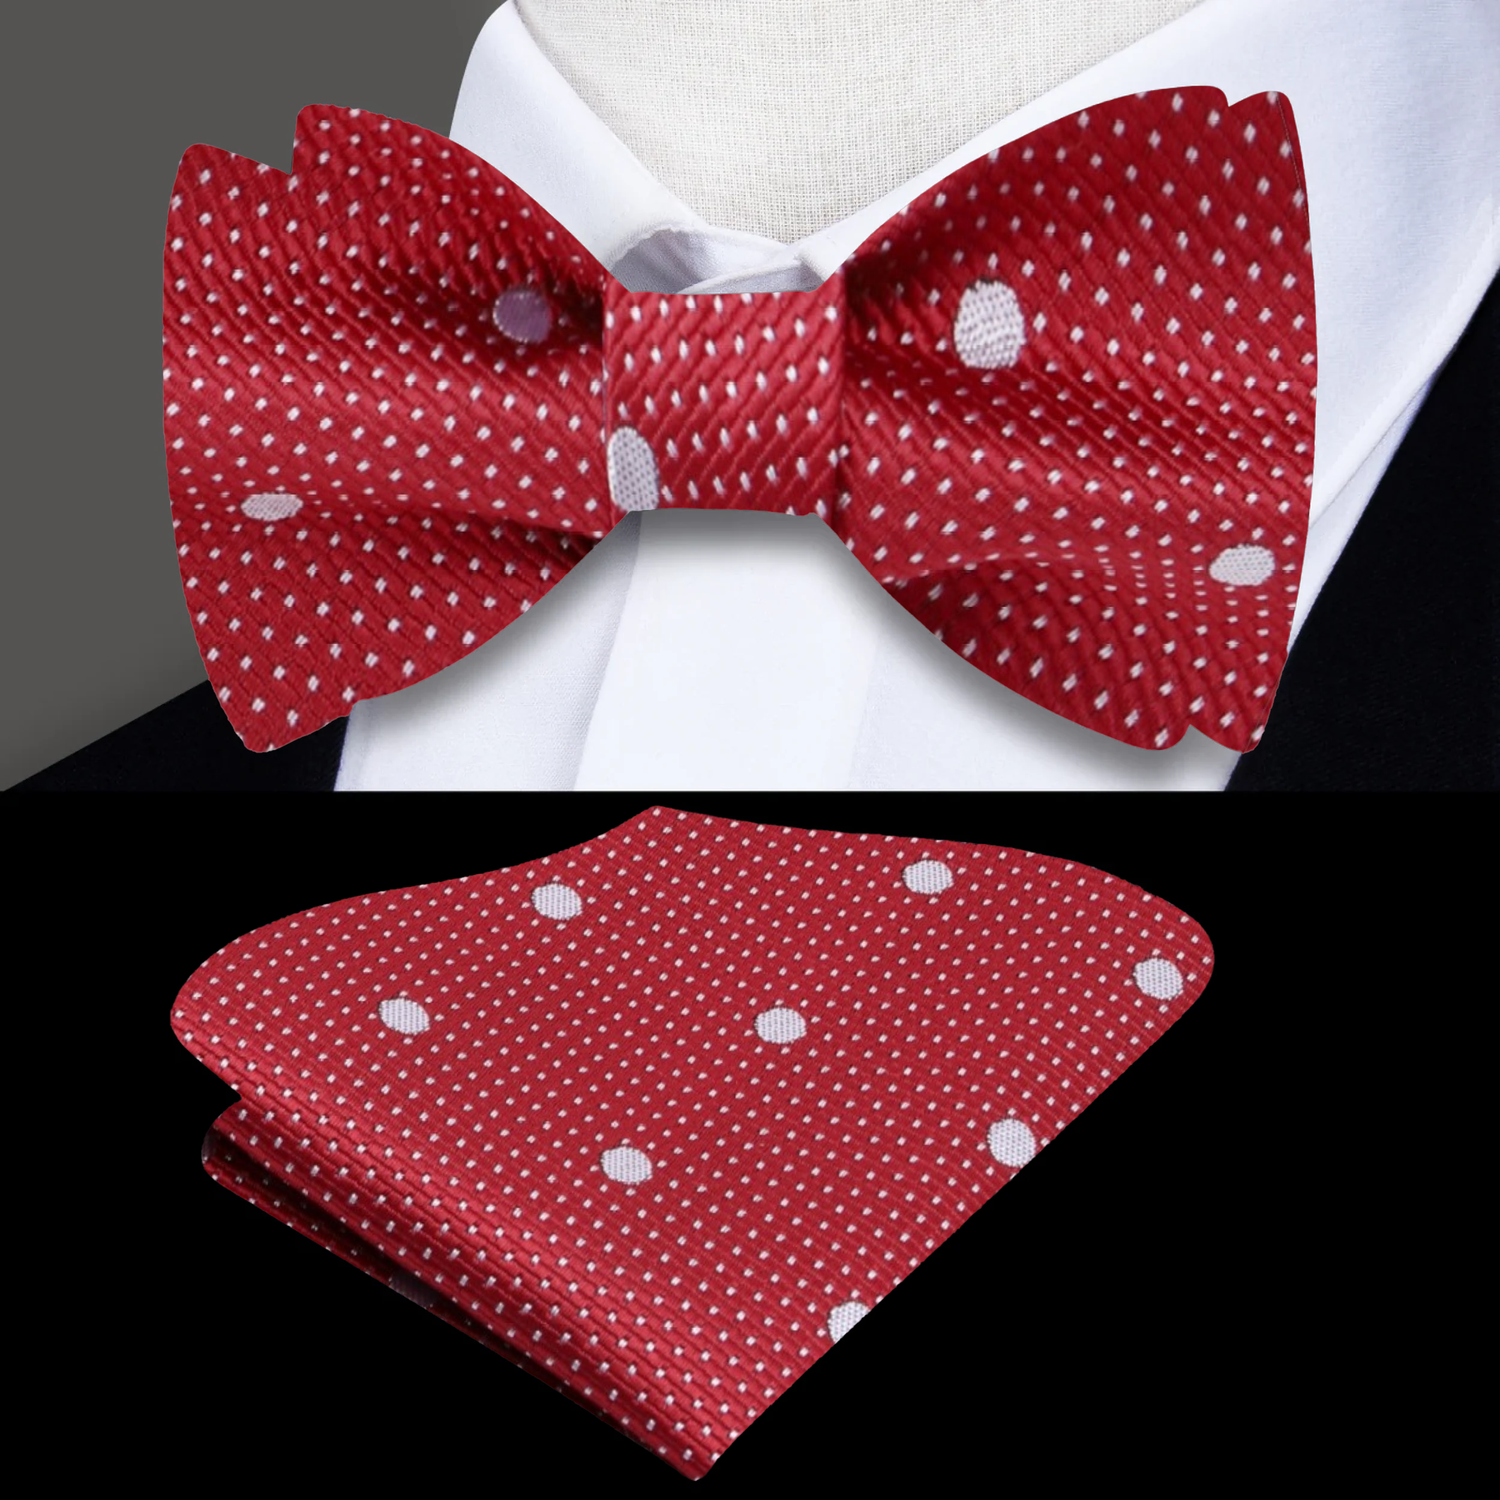 A Red, White Polka Dot Pattern Self Tie Bow Tie, Matching Pocket Square